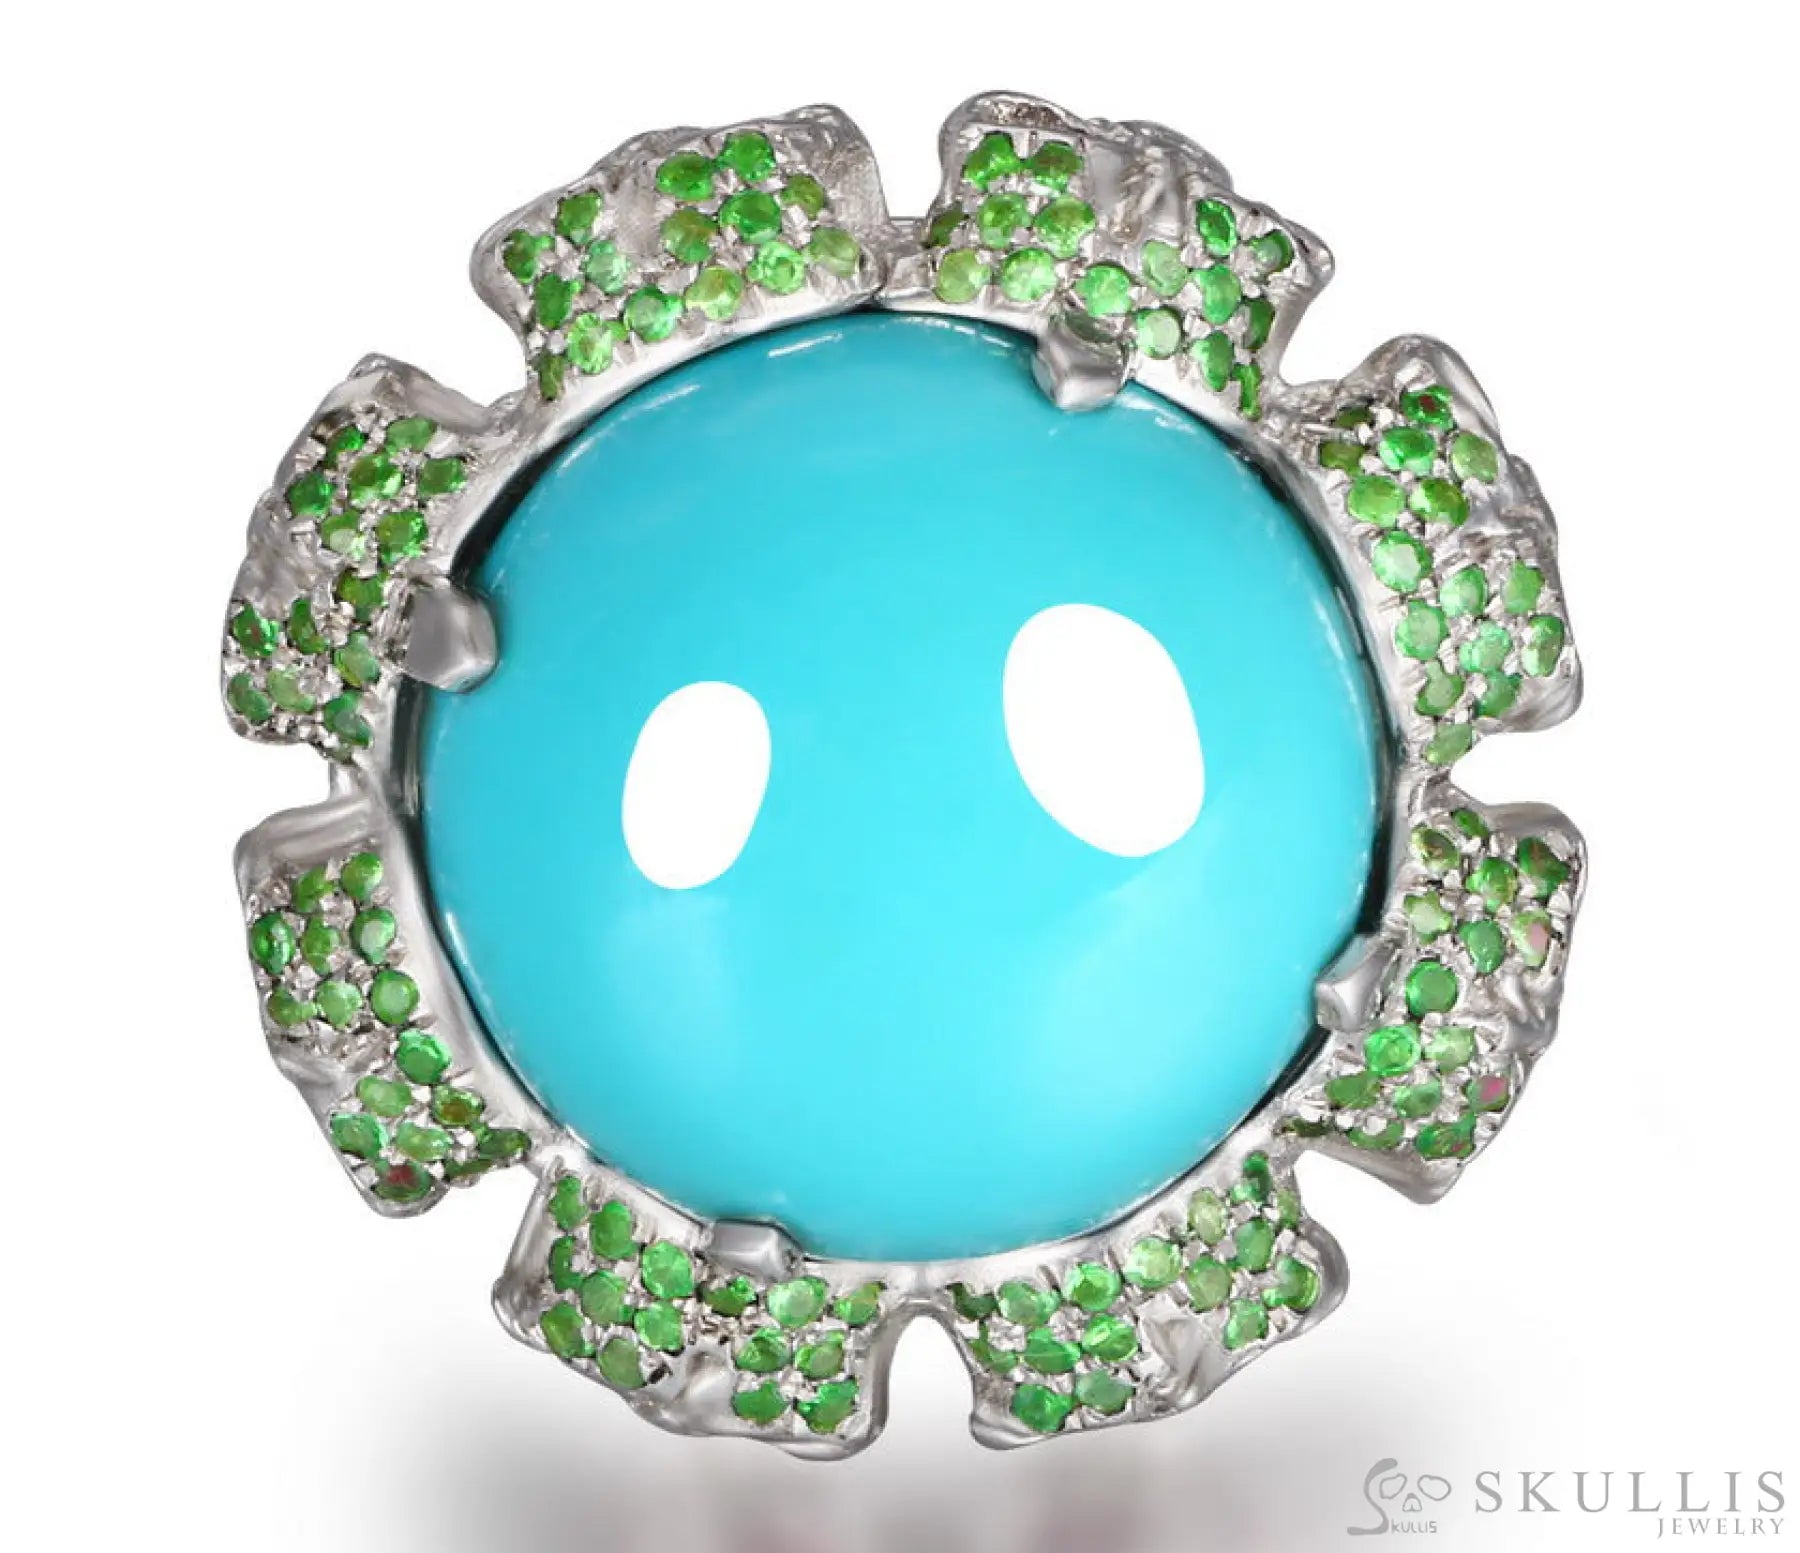 Gem Skull Ring Of Round Cut Turquoise Carved With Ruby Eyes Skulls In 925 Sterling Silver